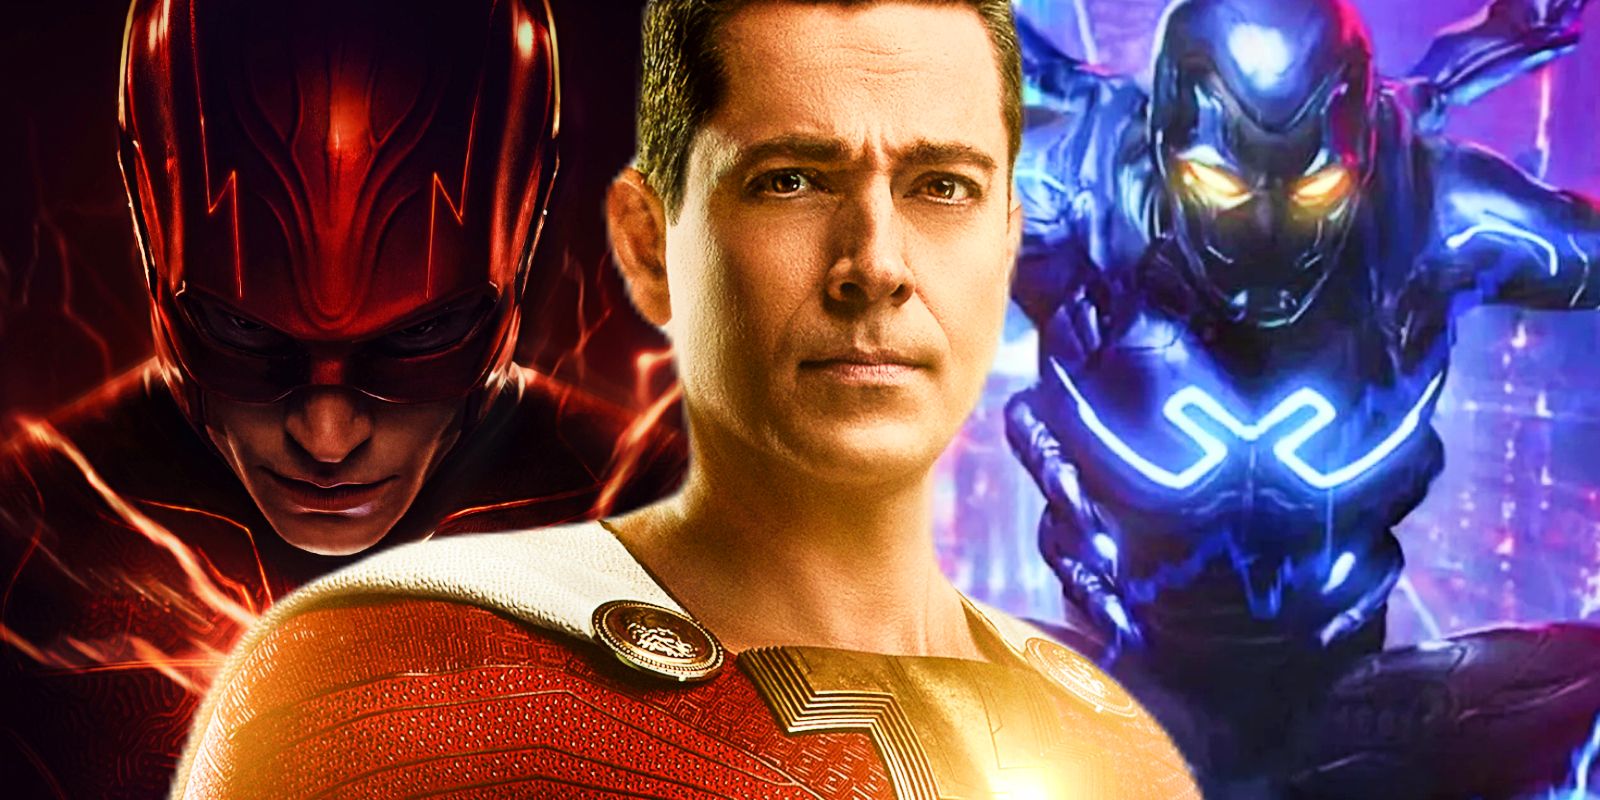 Does Shazam 2 make any difference to DC's future?